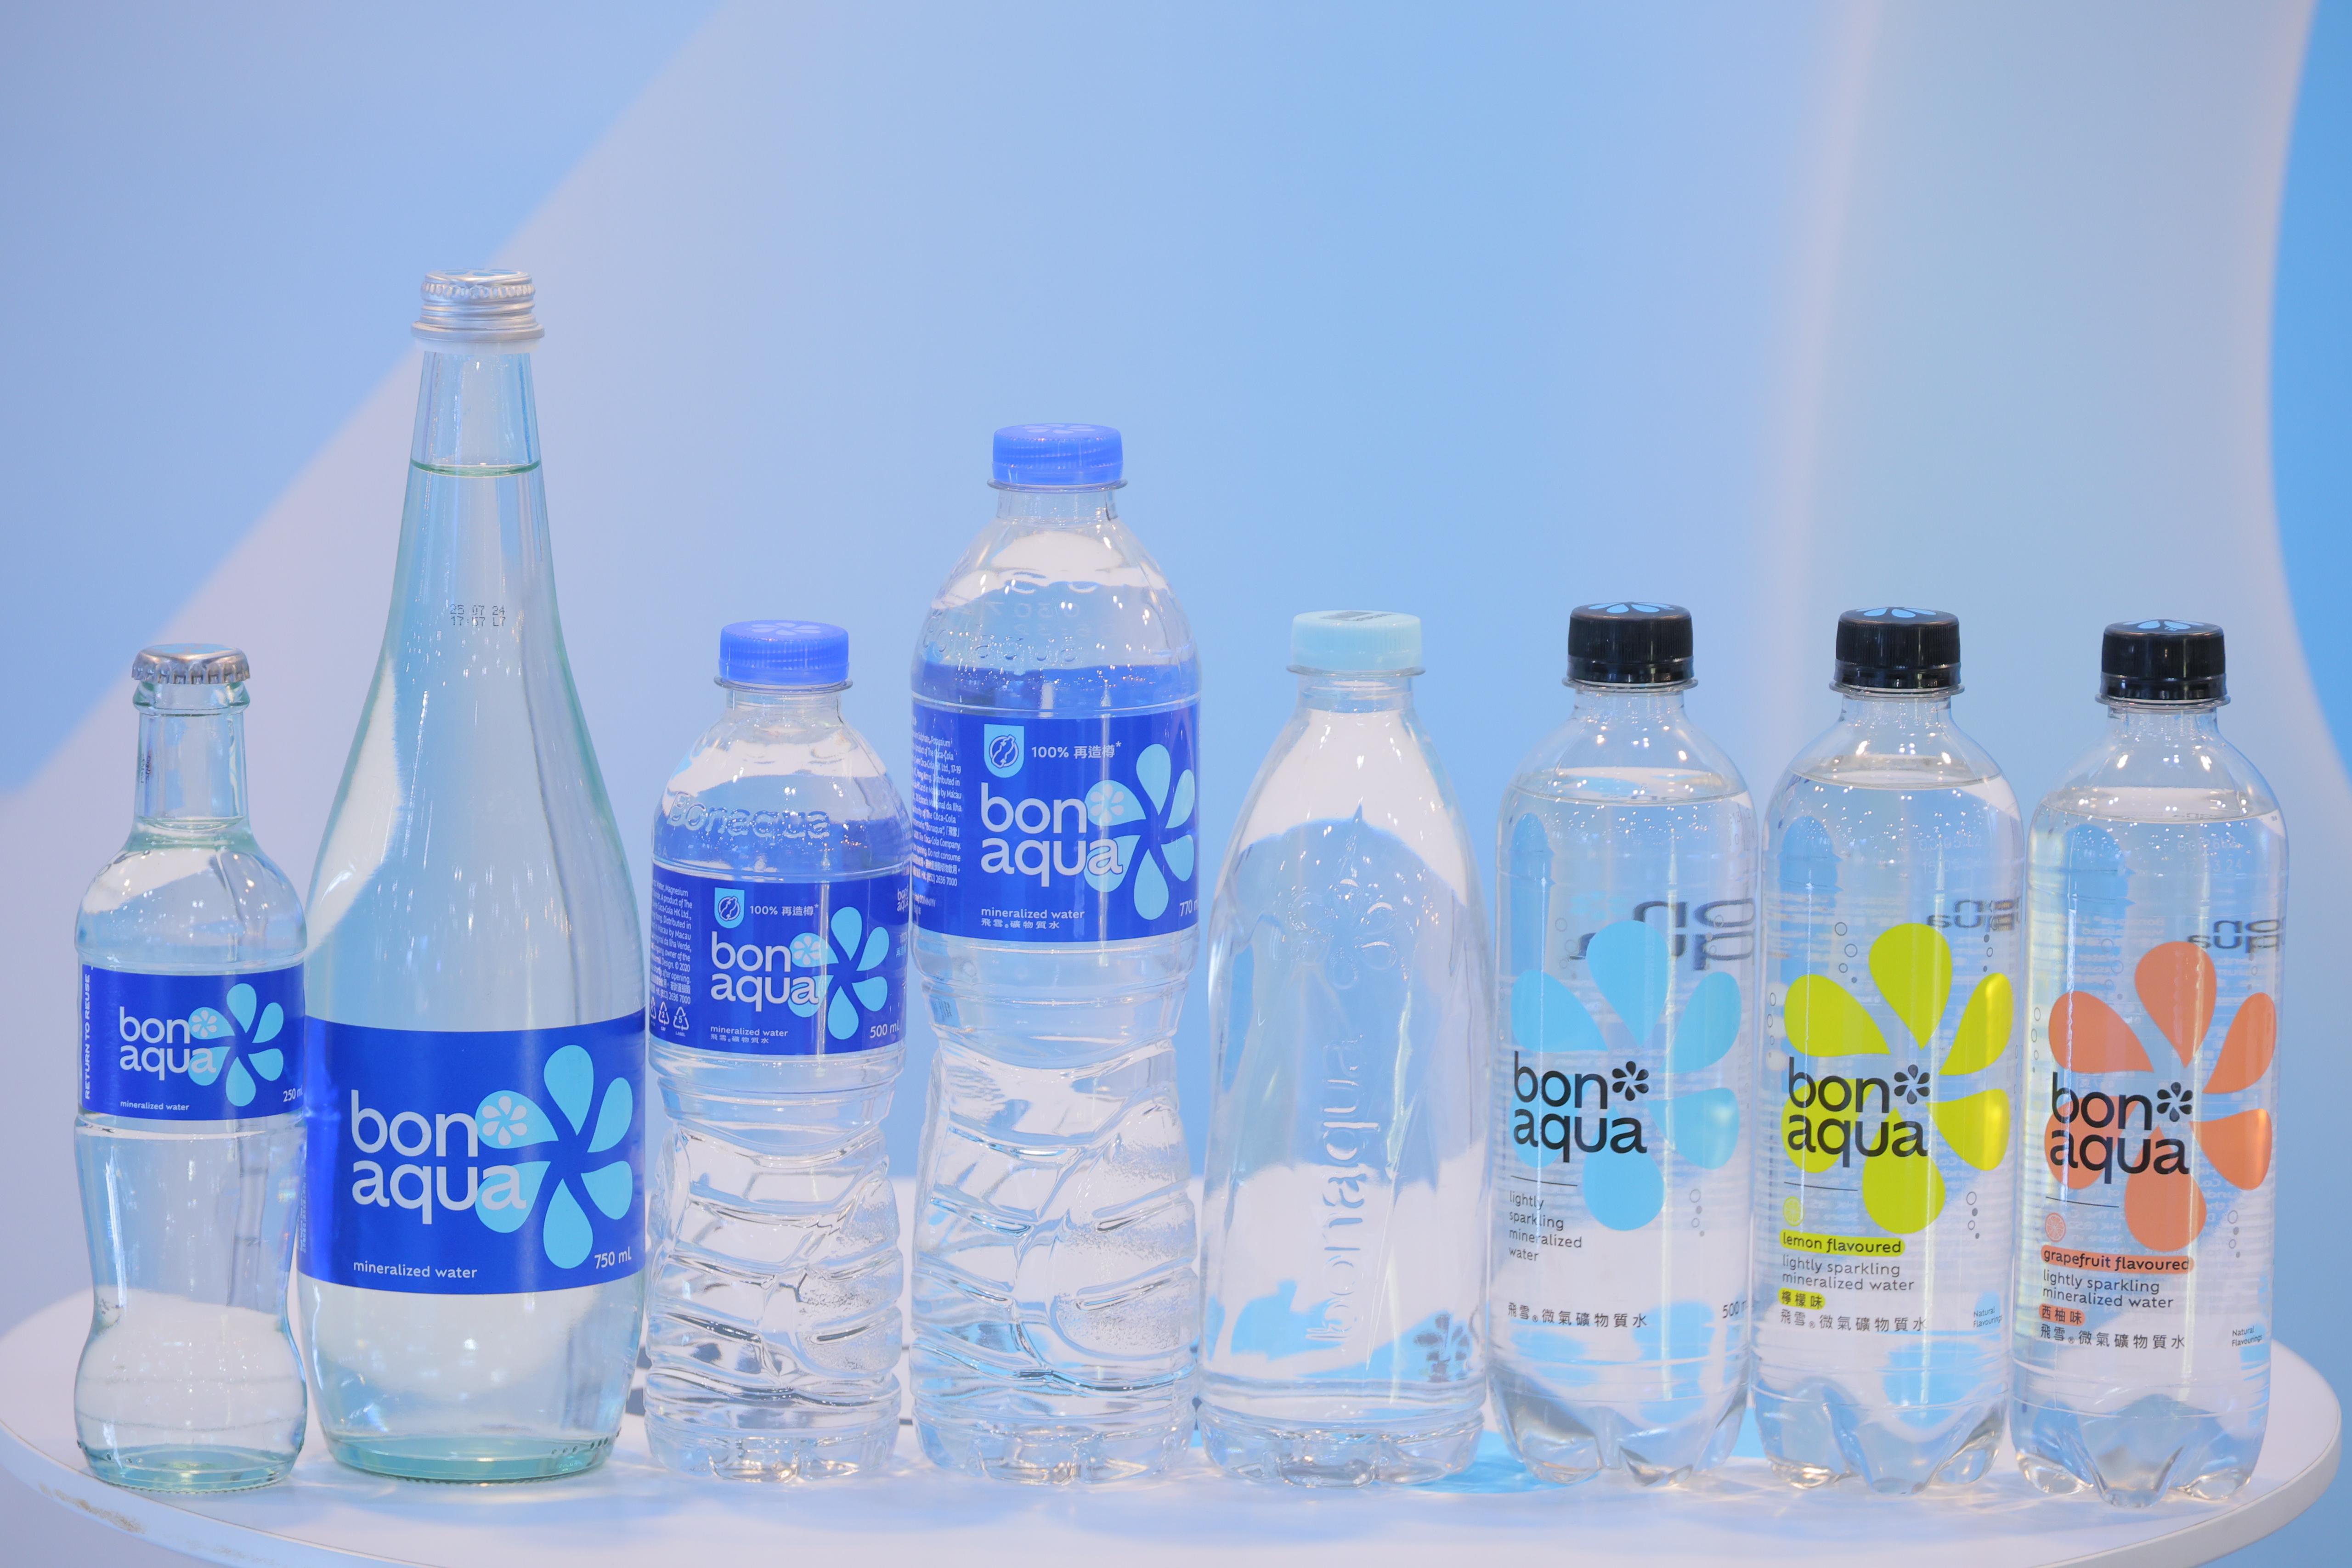 Bonaqua® has continuously worked to improve its packaging with the goal of reducing carbon emissions and increasing recyclability. Over the years, it has introduced bottled water packaging options from 